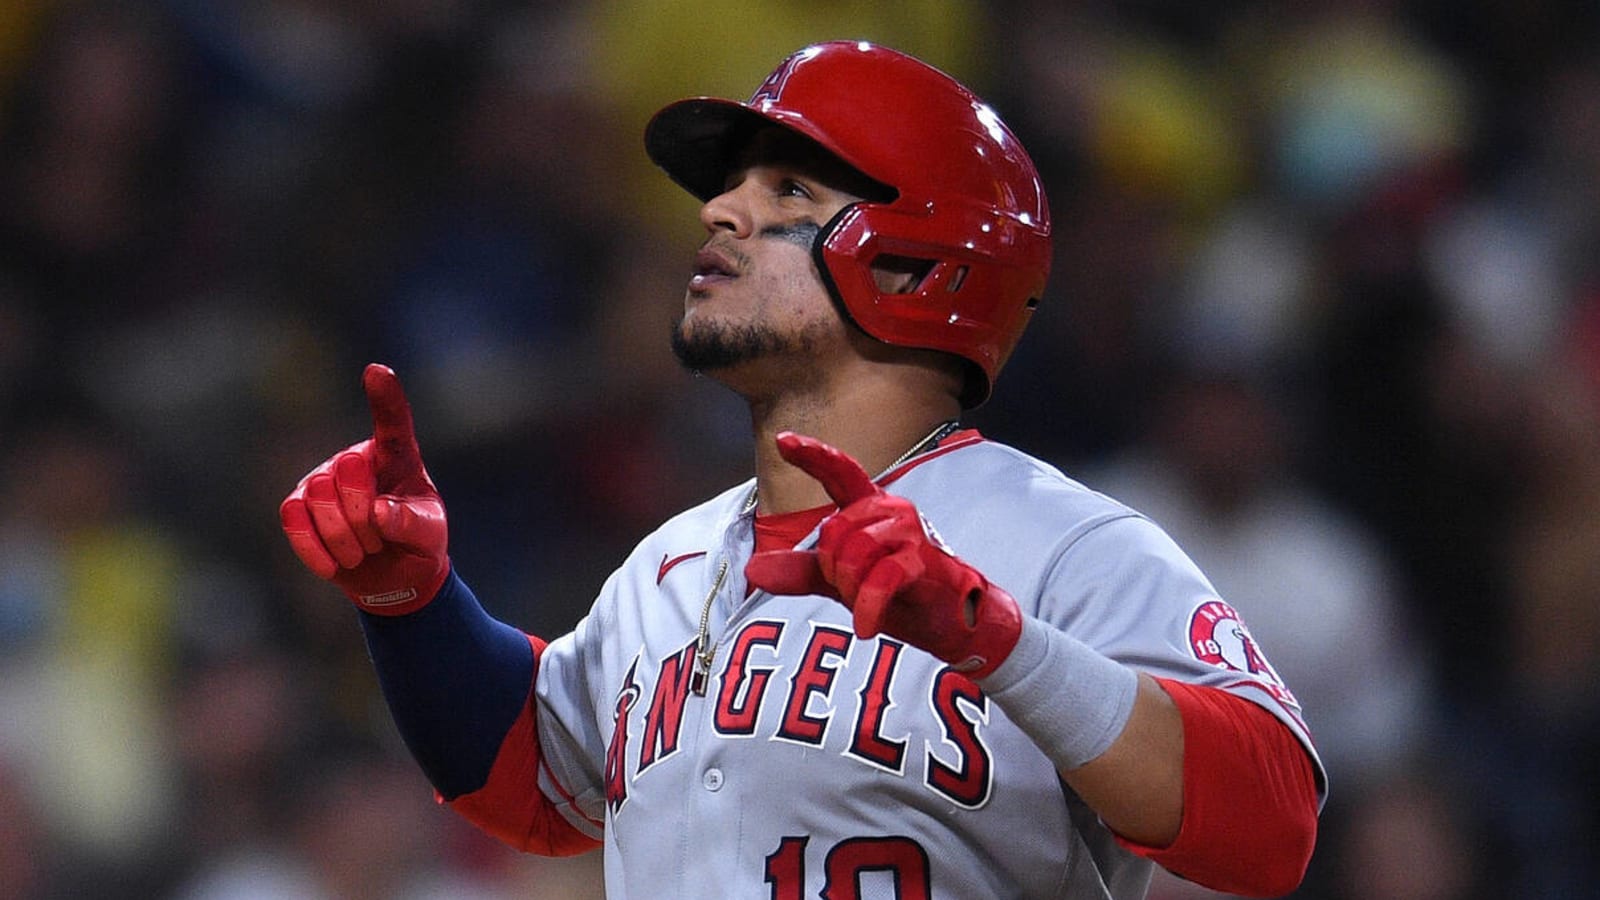 Angels re-sign Juan Lagares to minors contract